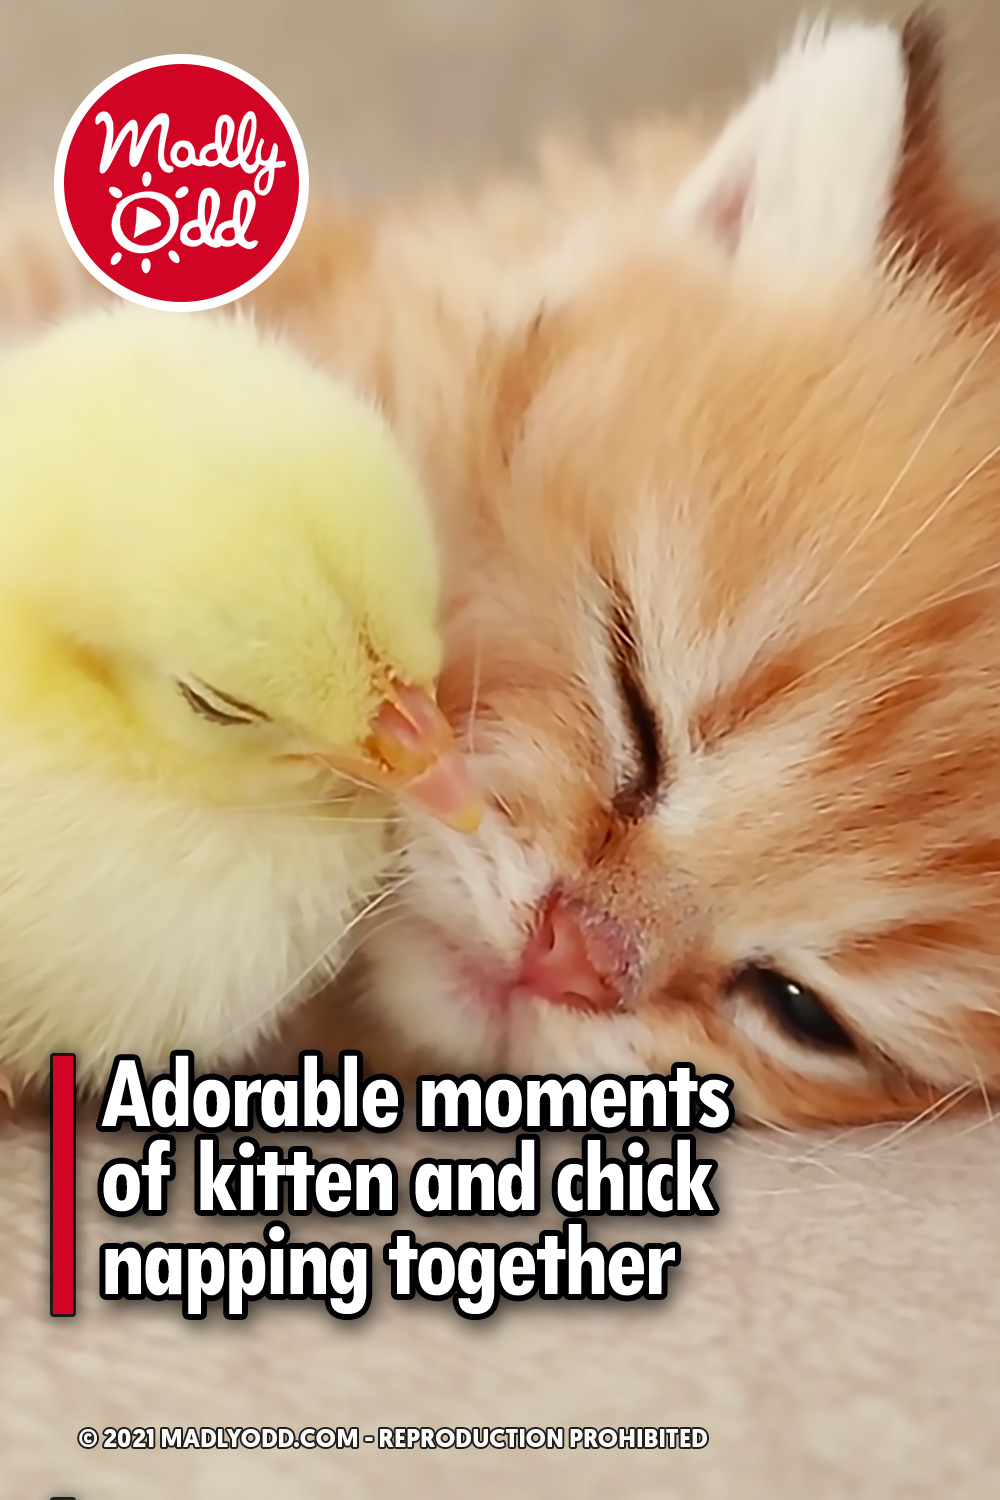 Adorable moments of kitten and chick napping together